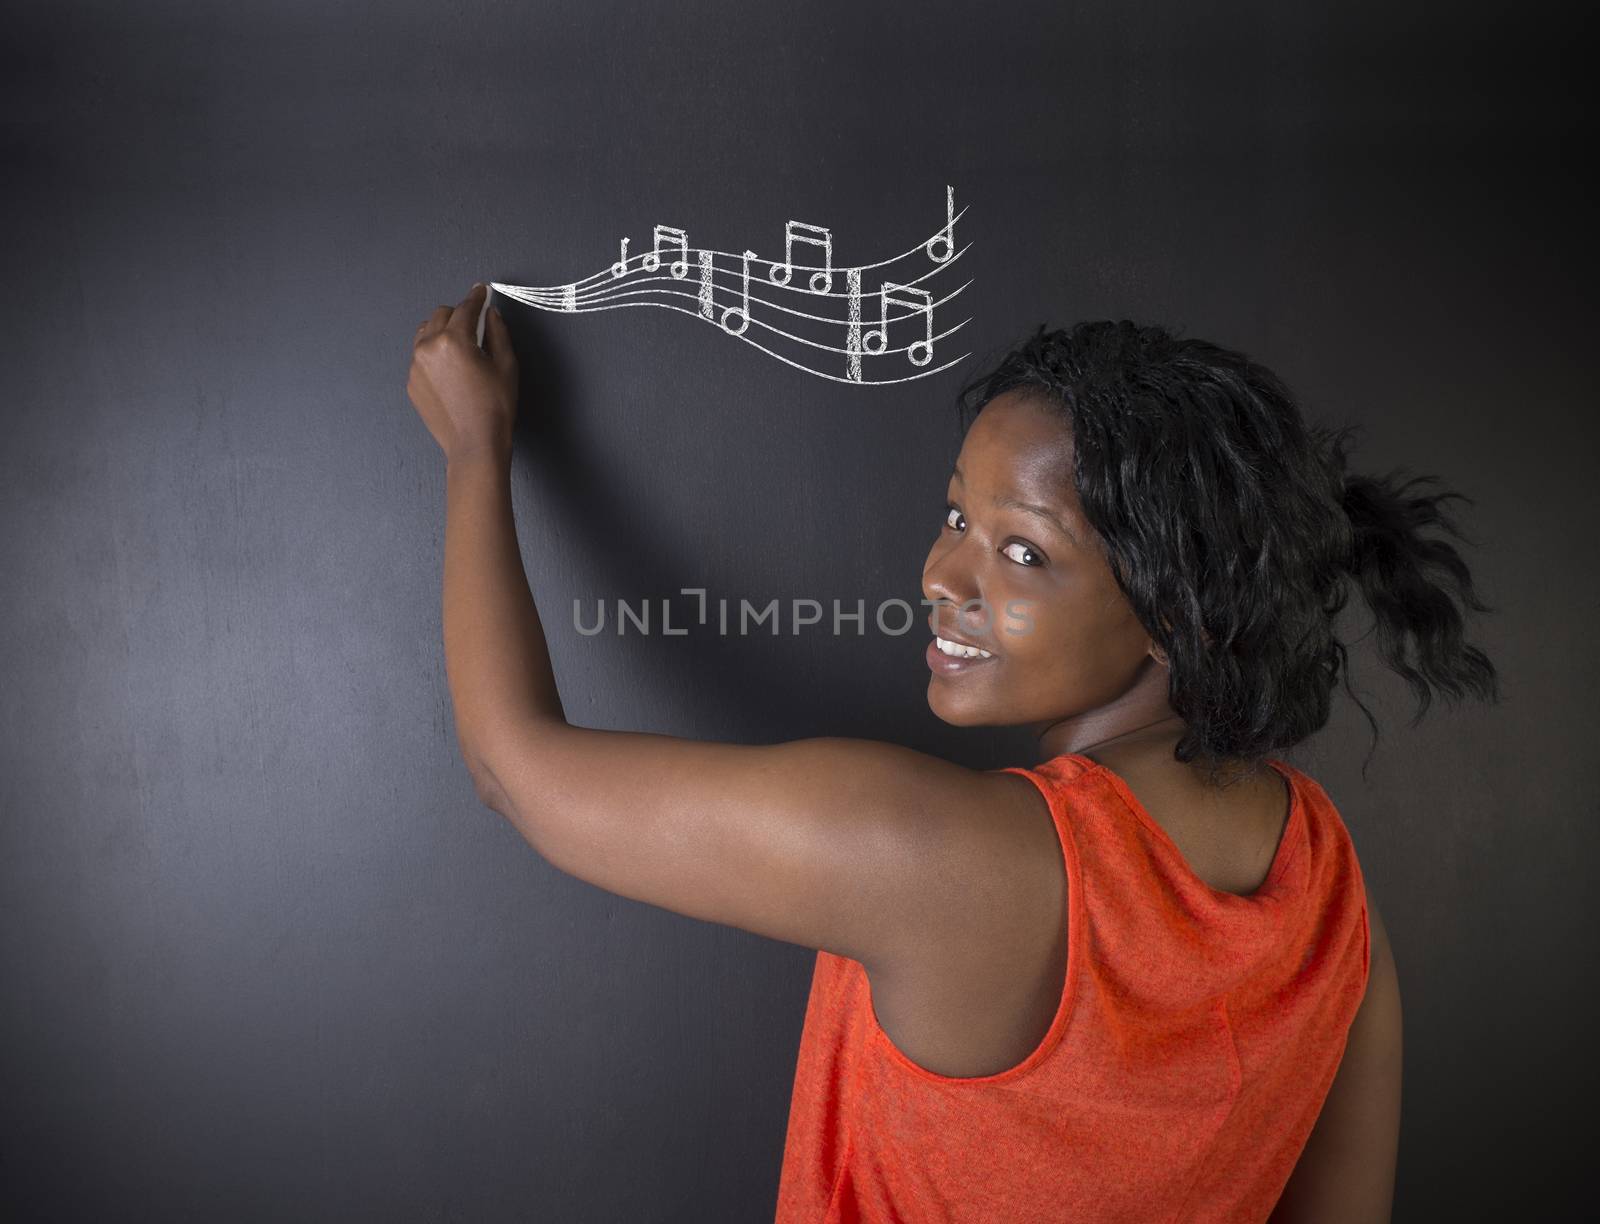 Learn music South African or African American woman teacher or student with chalk music notes blackboard background